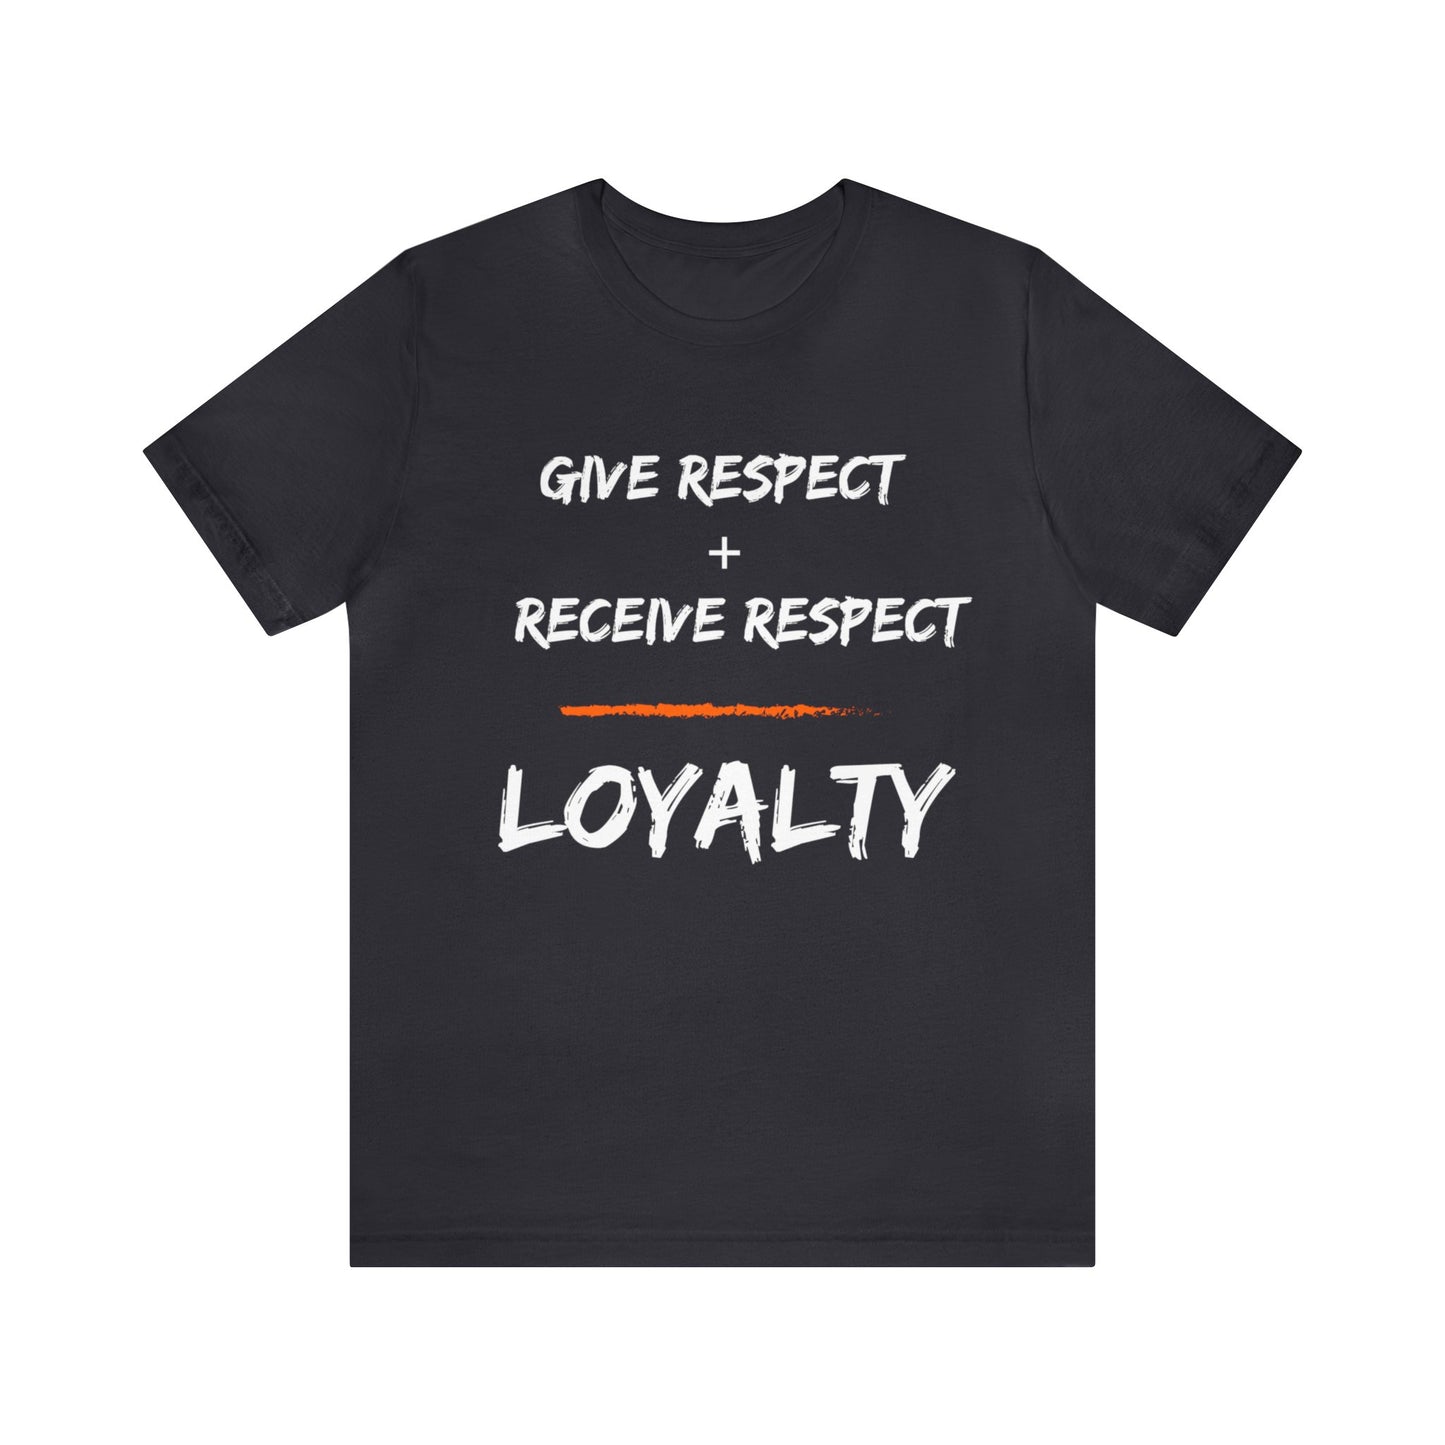 Give Respect + Reveive Respect = Loyalty (W-Writing) Unisex Jersey Short Sleeve Tee